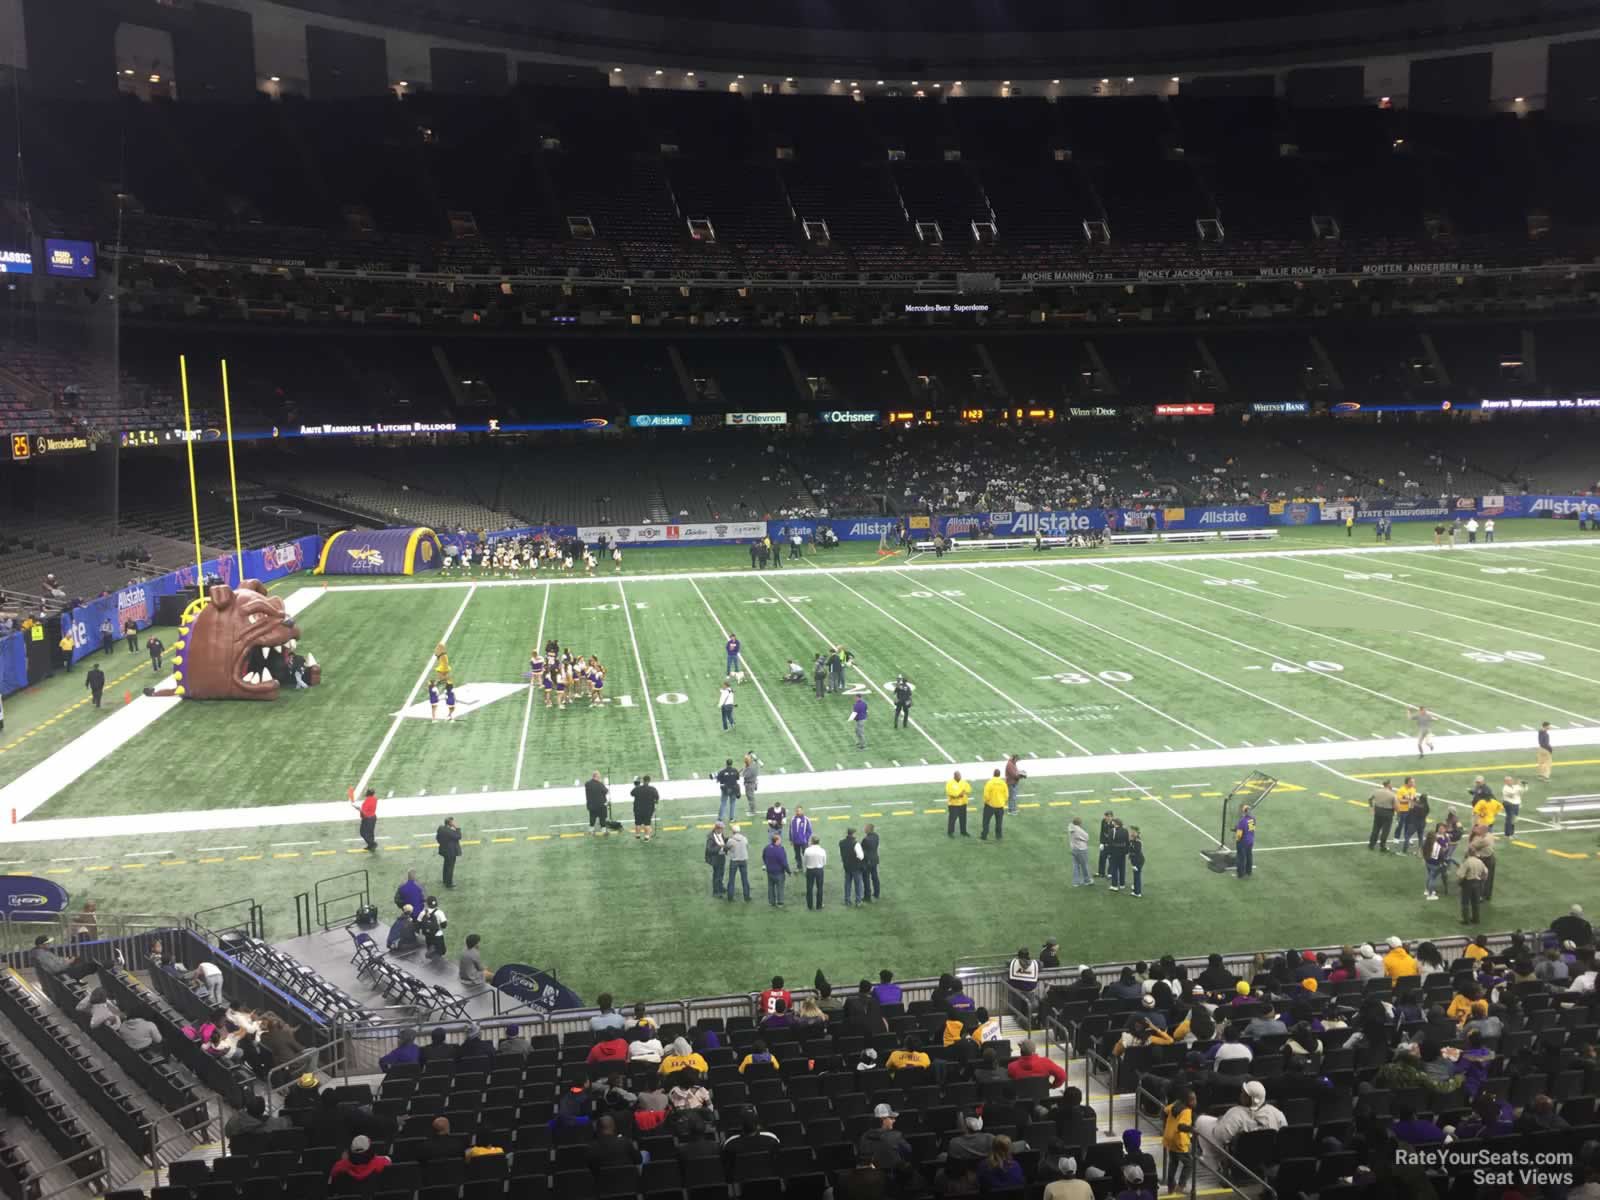 section 271, row 2 seat view  for football - caesars superdome